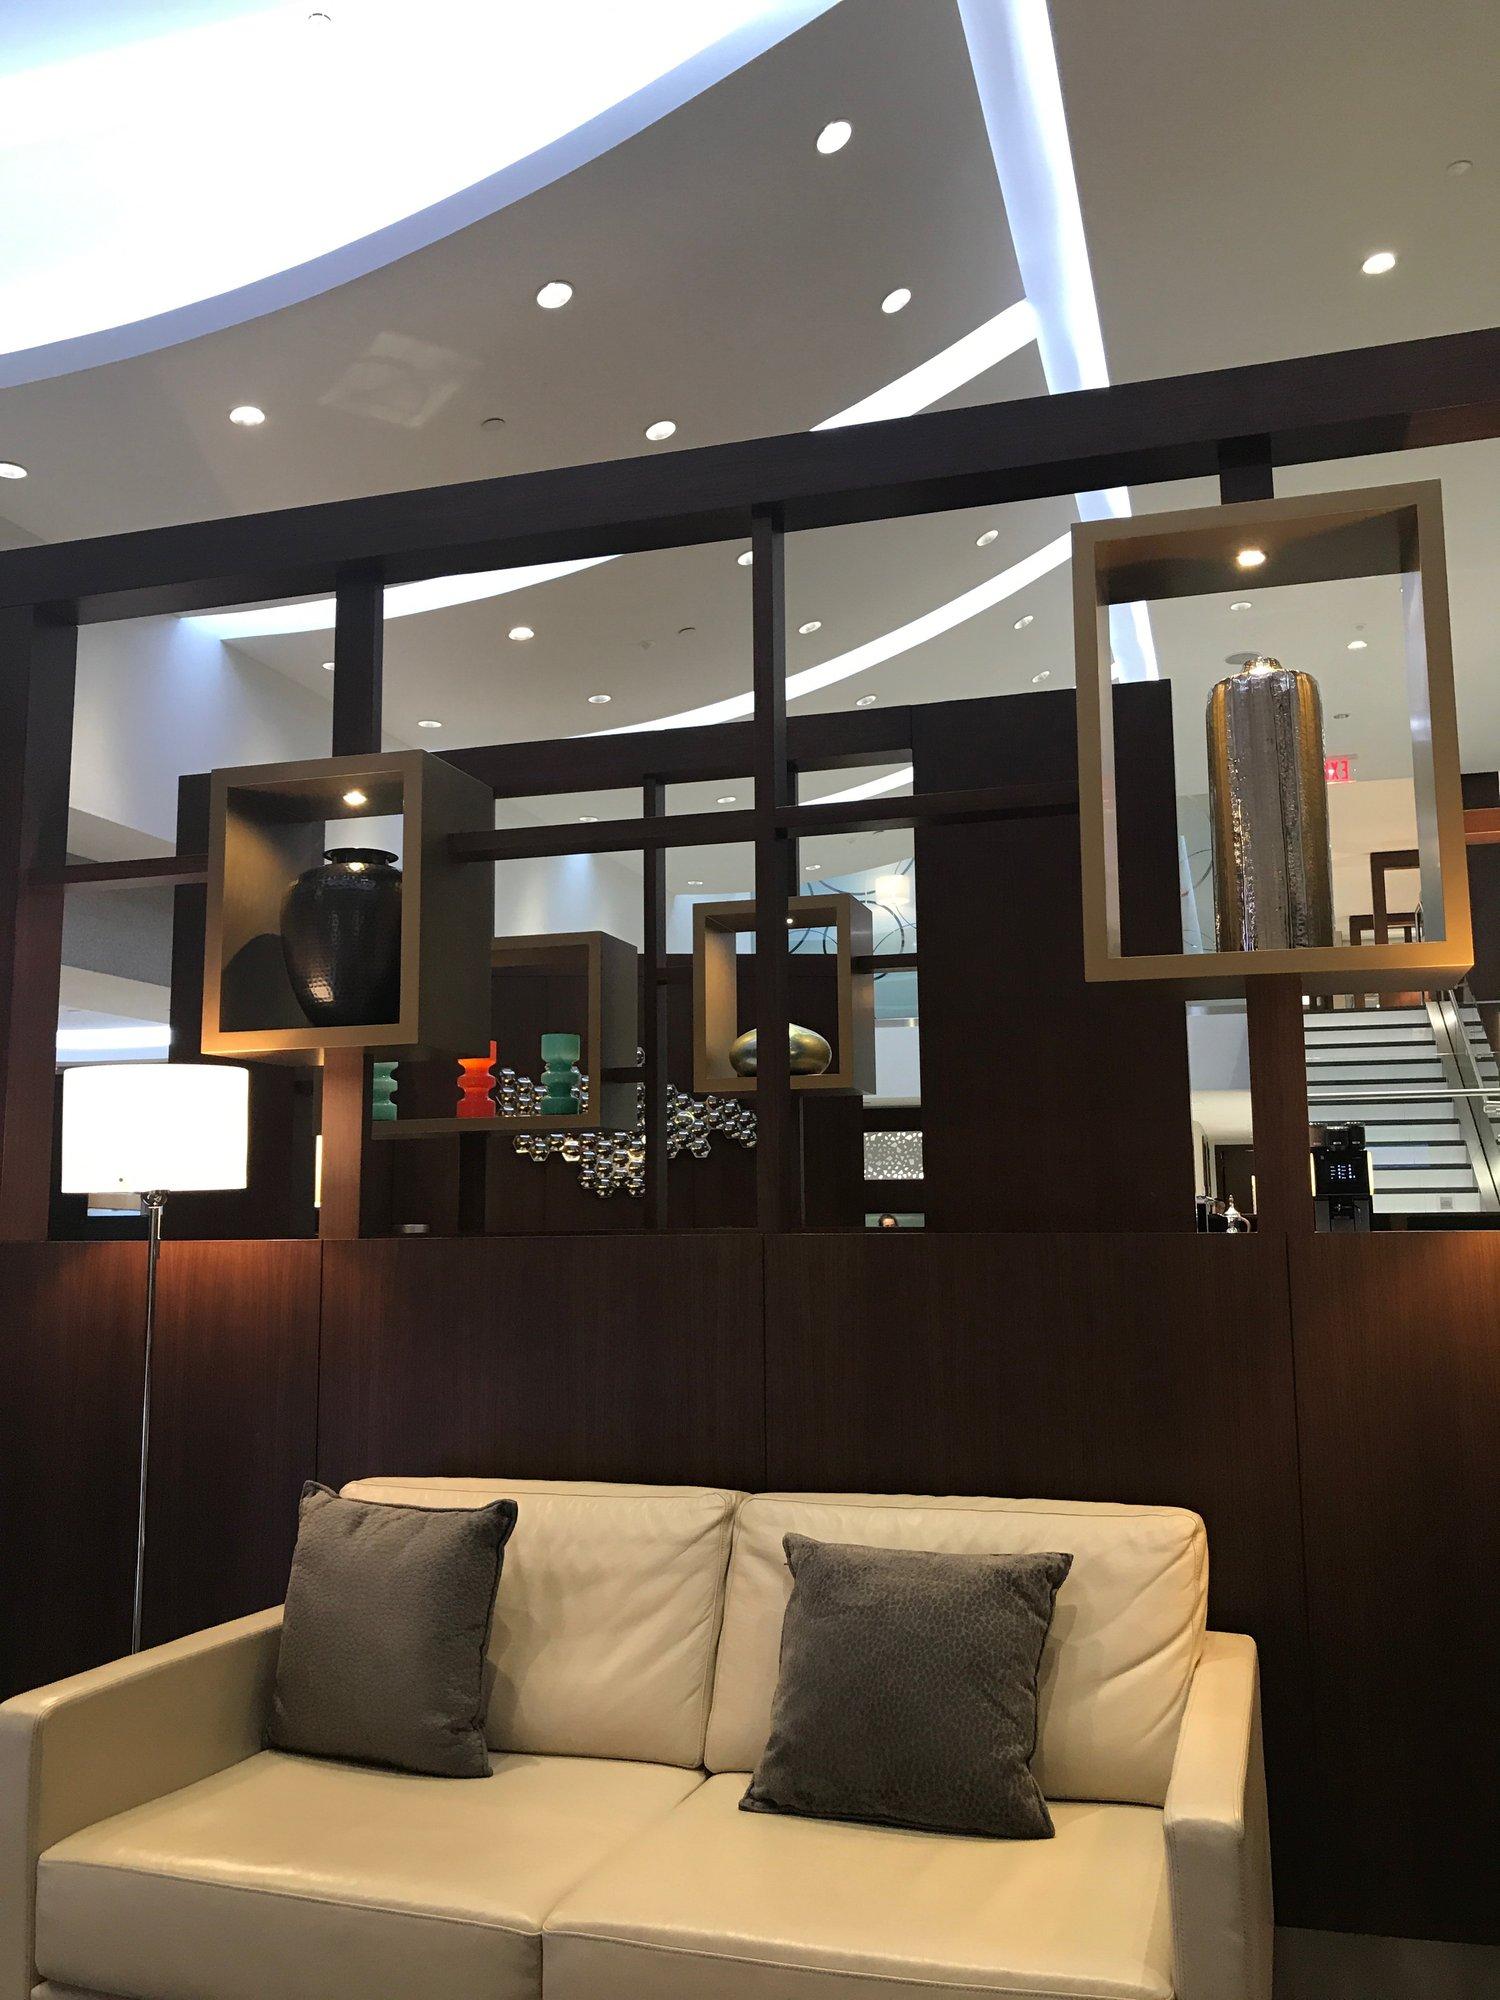 Etihad Airways First & Business Class Lounge image 13 of 17